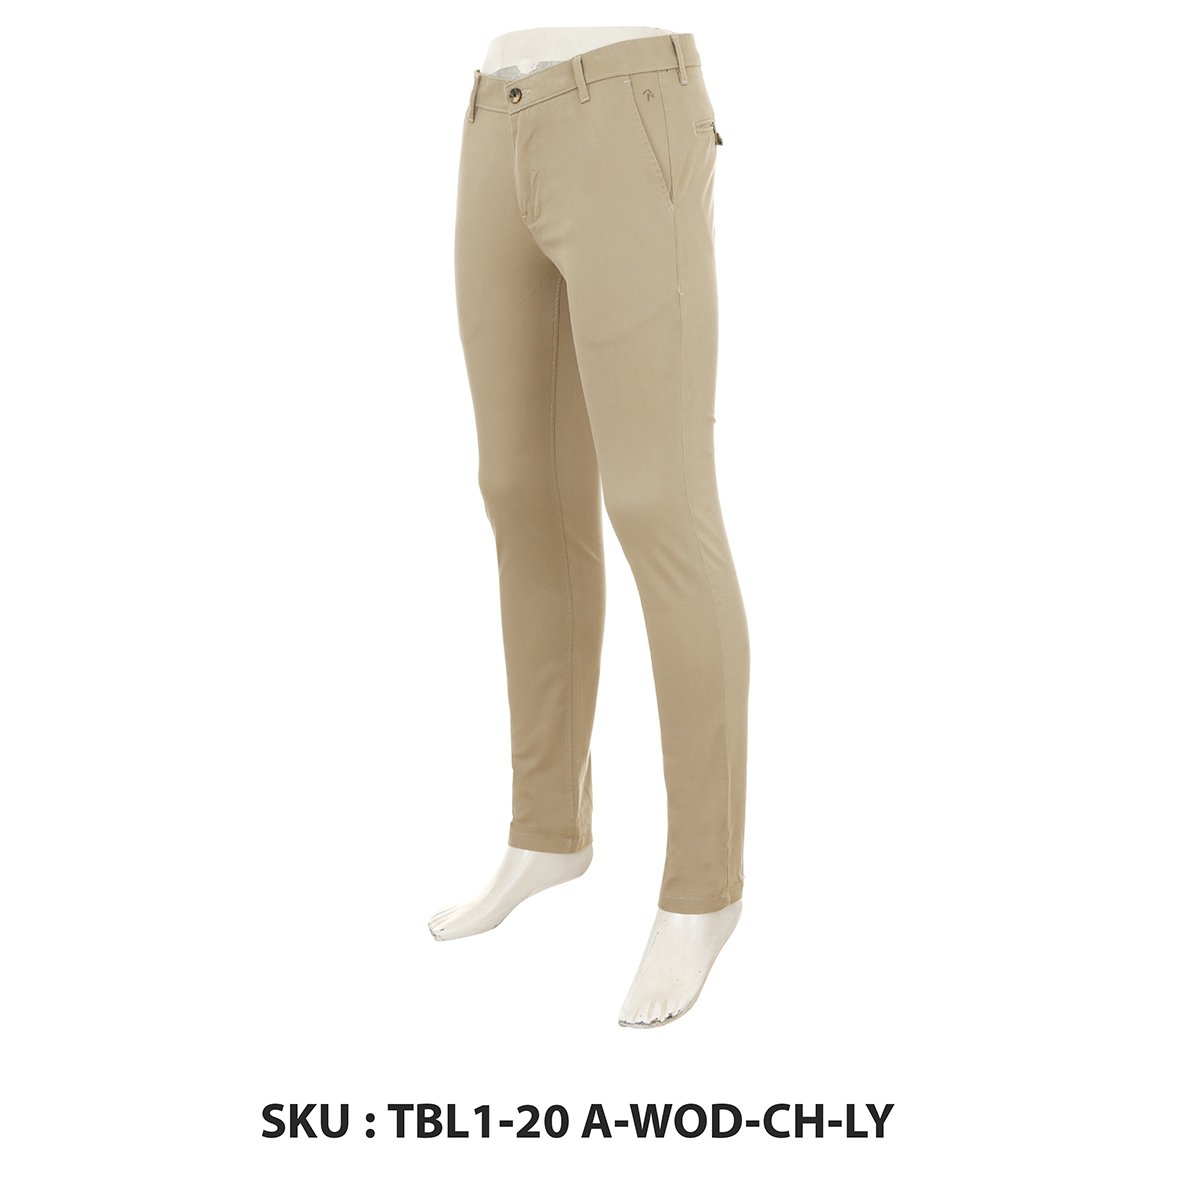 Classic Polo Mens Trousers Tbl1-20 A-Wod-Ch-Ly Wood 32